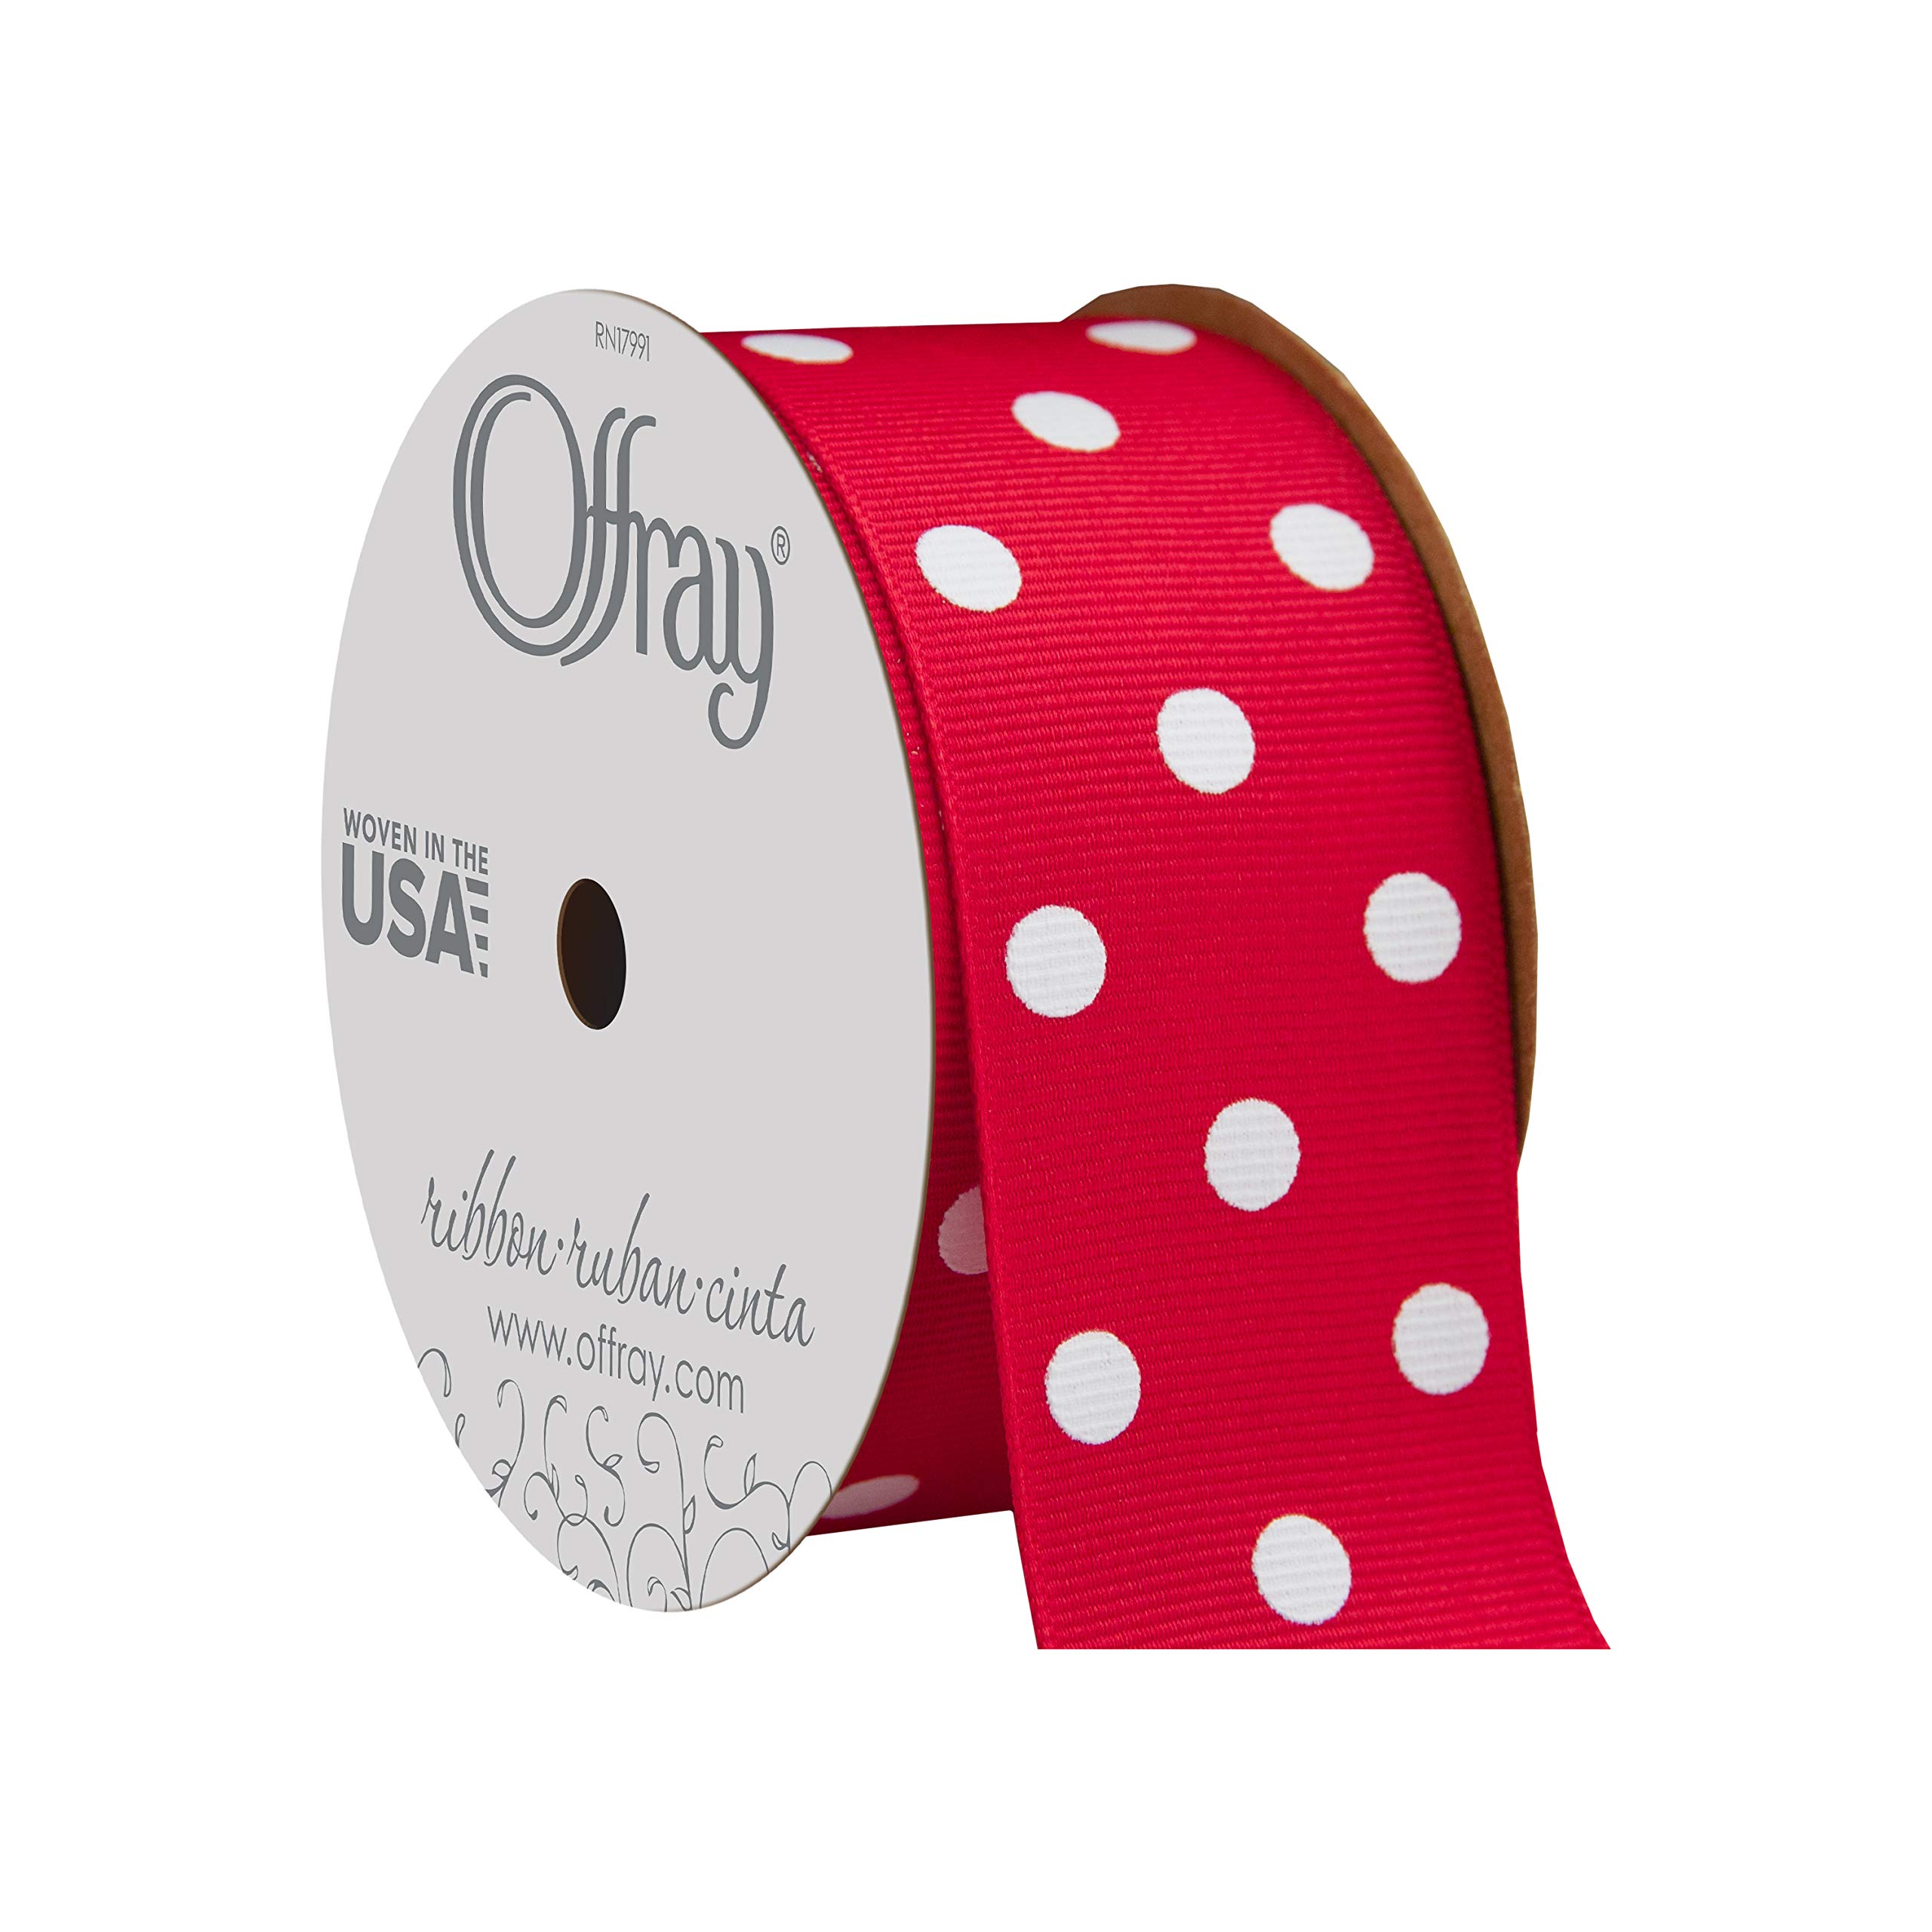 Offray 945872 15 Wide grosgrain Ribbon, Red and White Polka Dot, 3 Yards